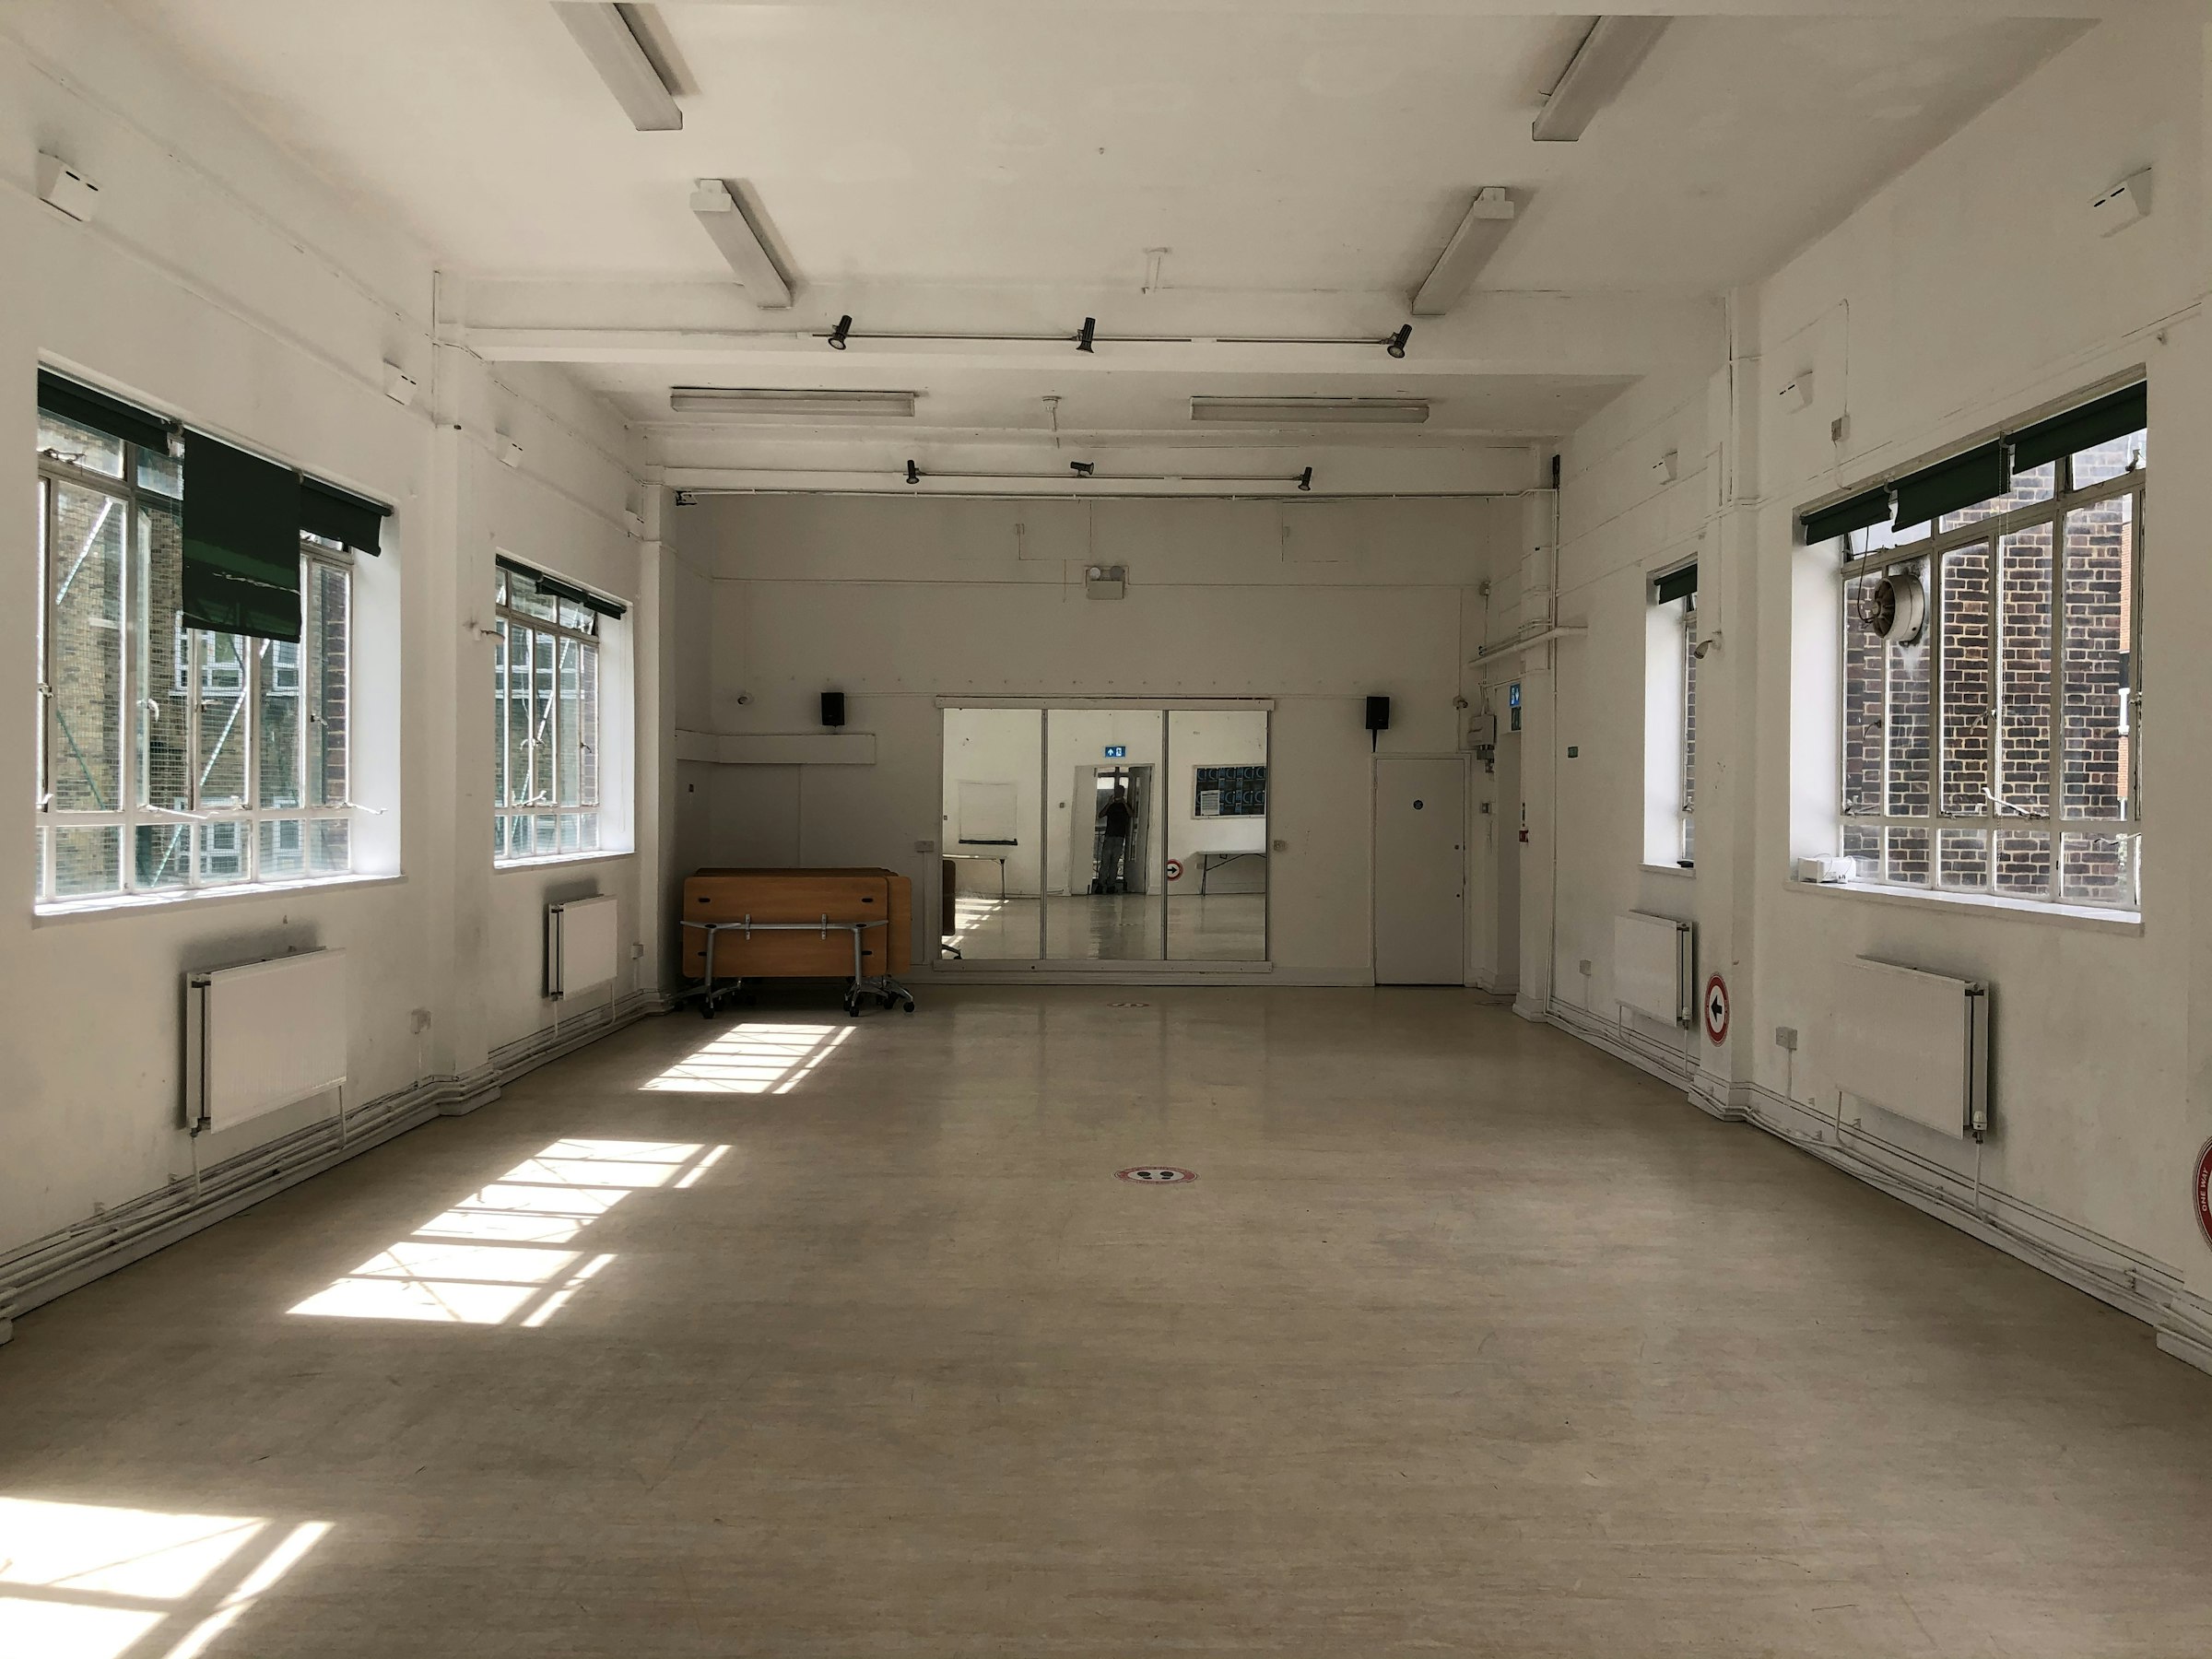 image of a rehearsal space to rent in London near old street and shoreditch